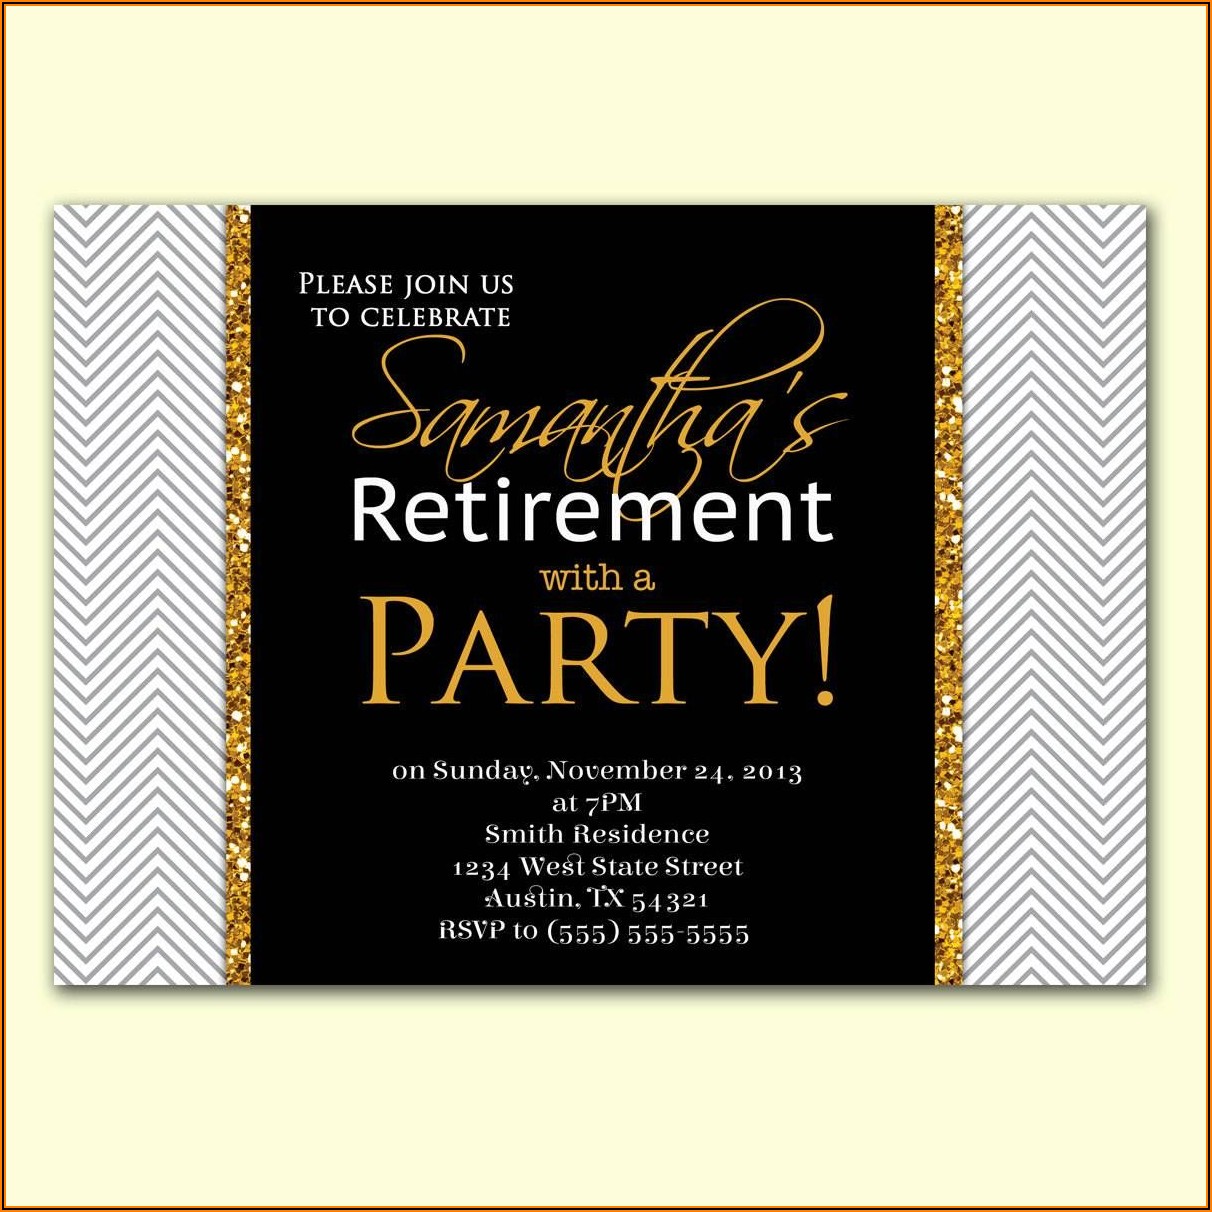 Word Templates For Retirement Invitations